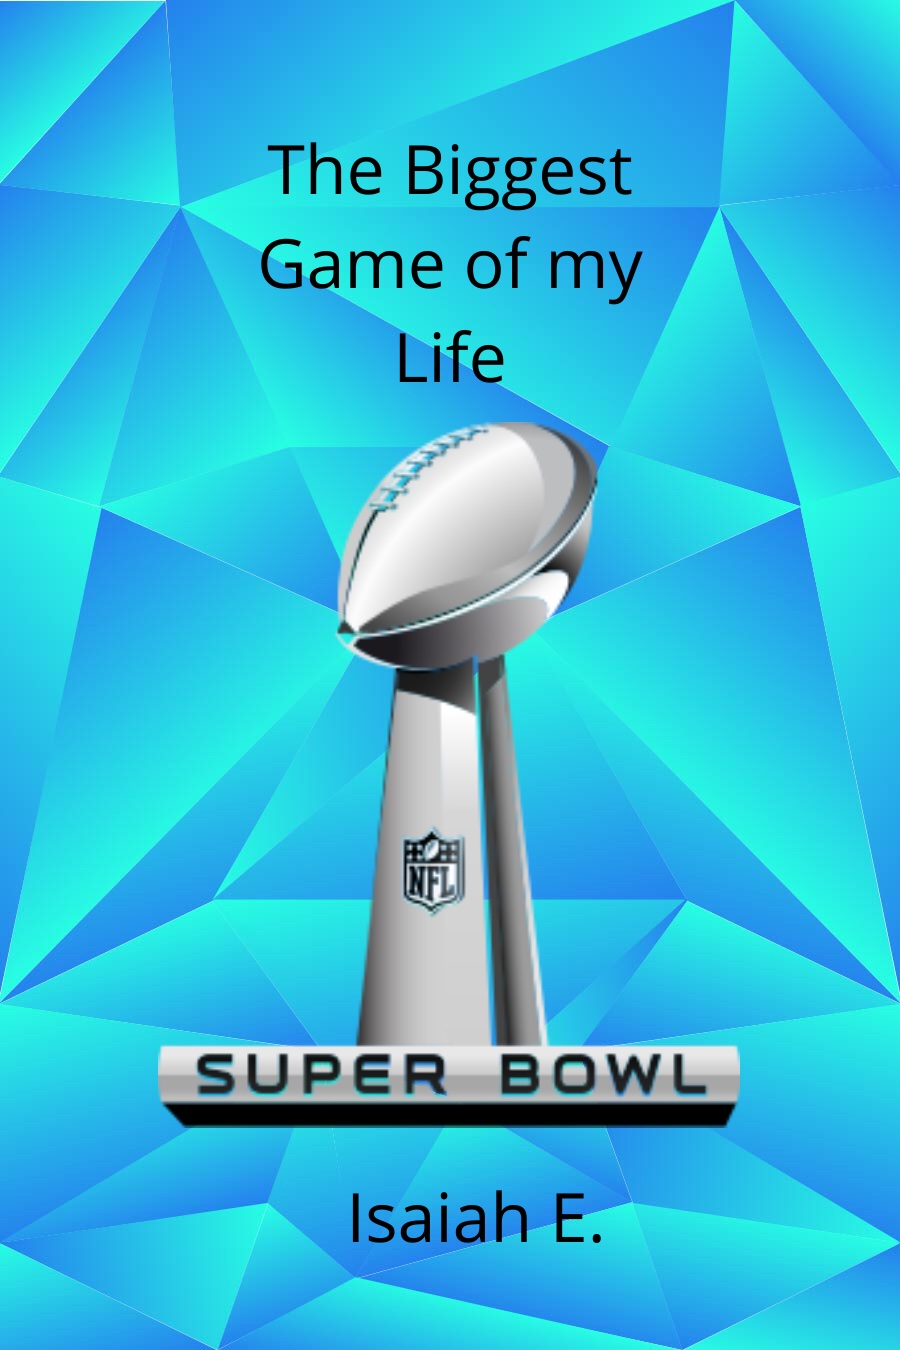 The Biggest Game of My Life by Isaiah E